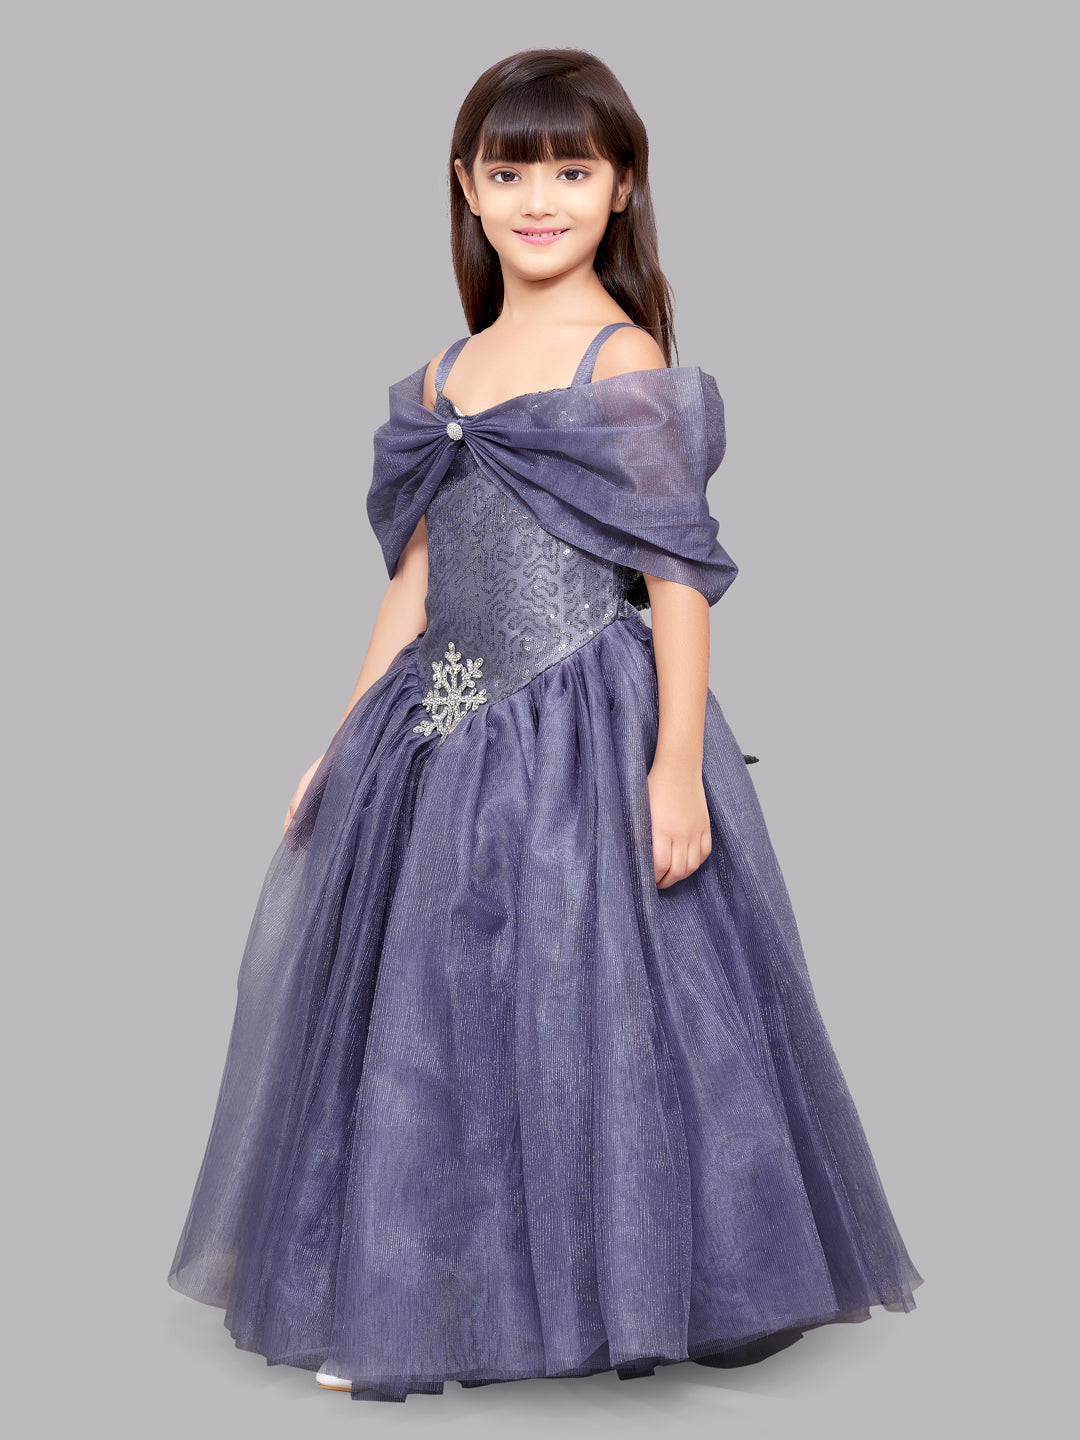 IBTOM CASTLE Kids Girls Flower Vintage Lace Princess Long Dress Tulle  Pageant Formal Party Wedding Floor Dance Evening Gown 7-8 Years White -  Walmart.com